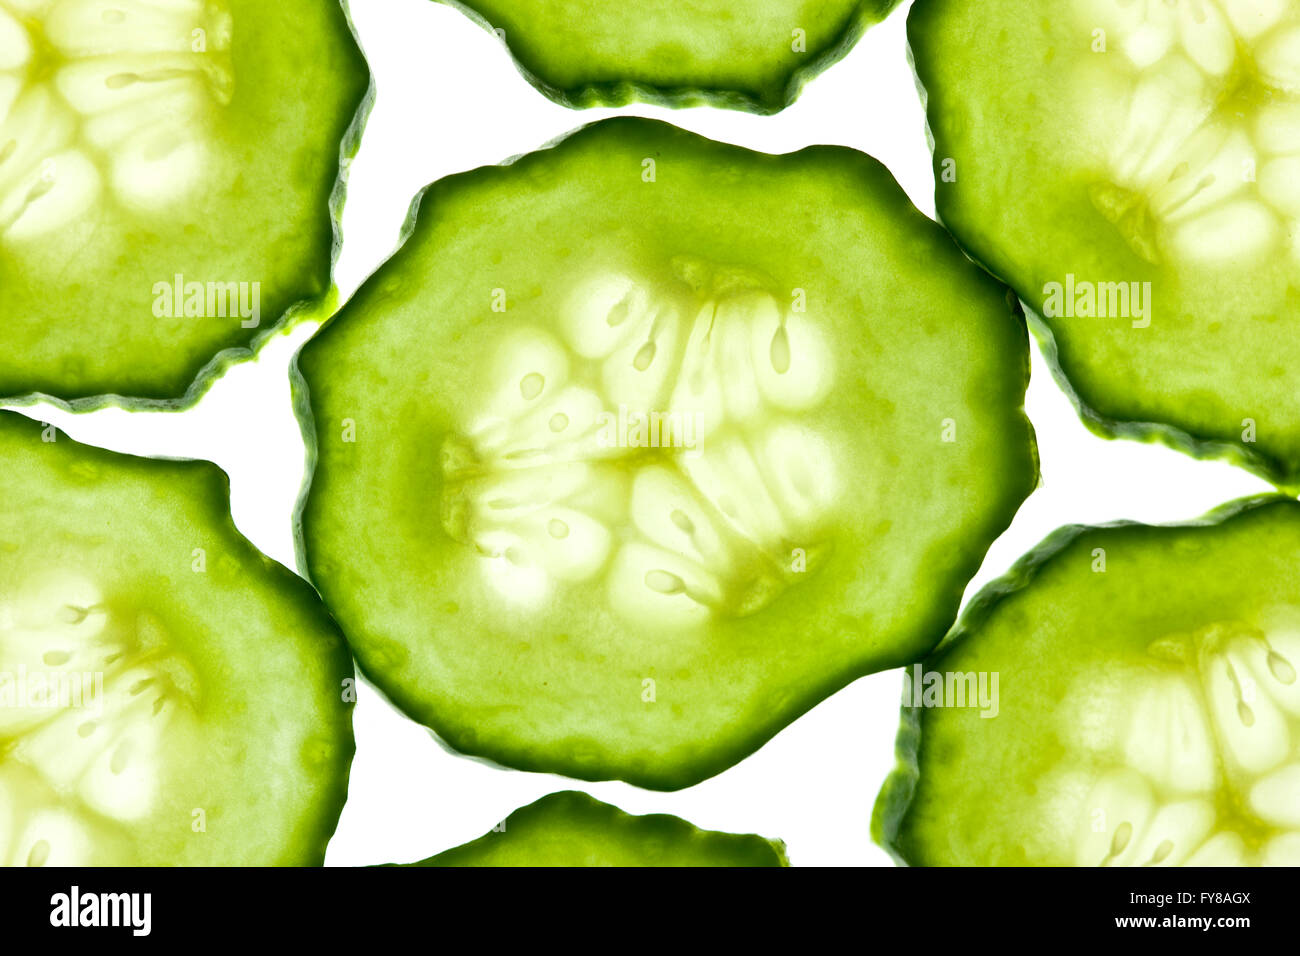 Cucumber sliced and isolated on white Stock Photo